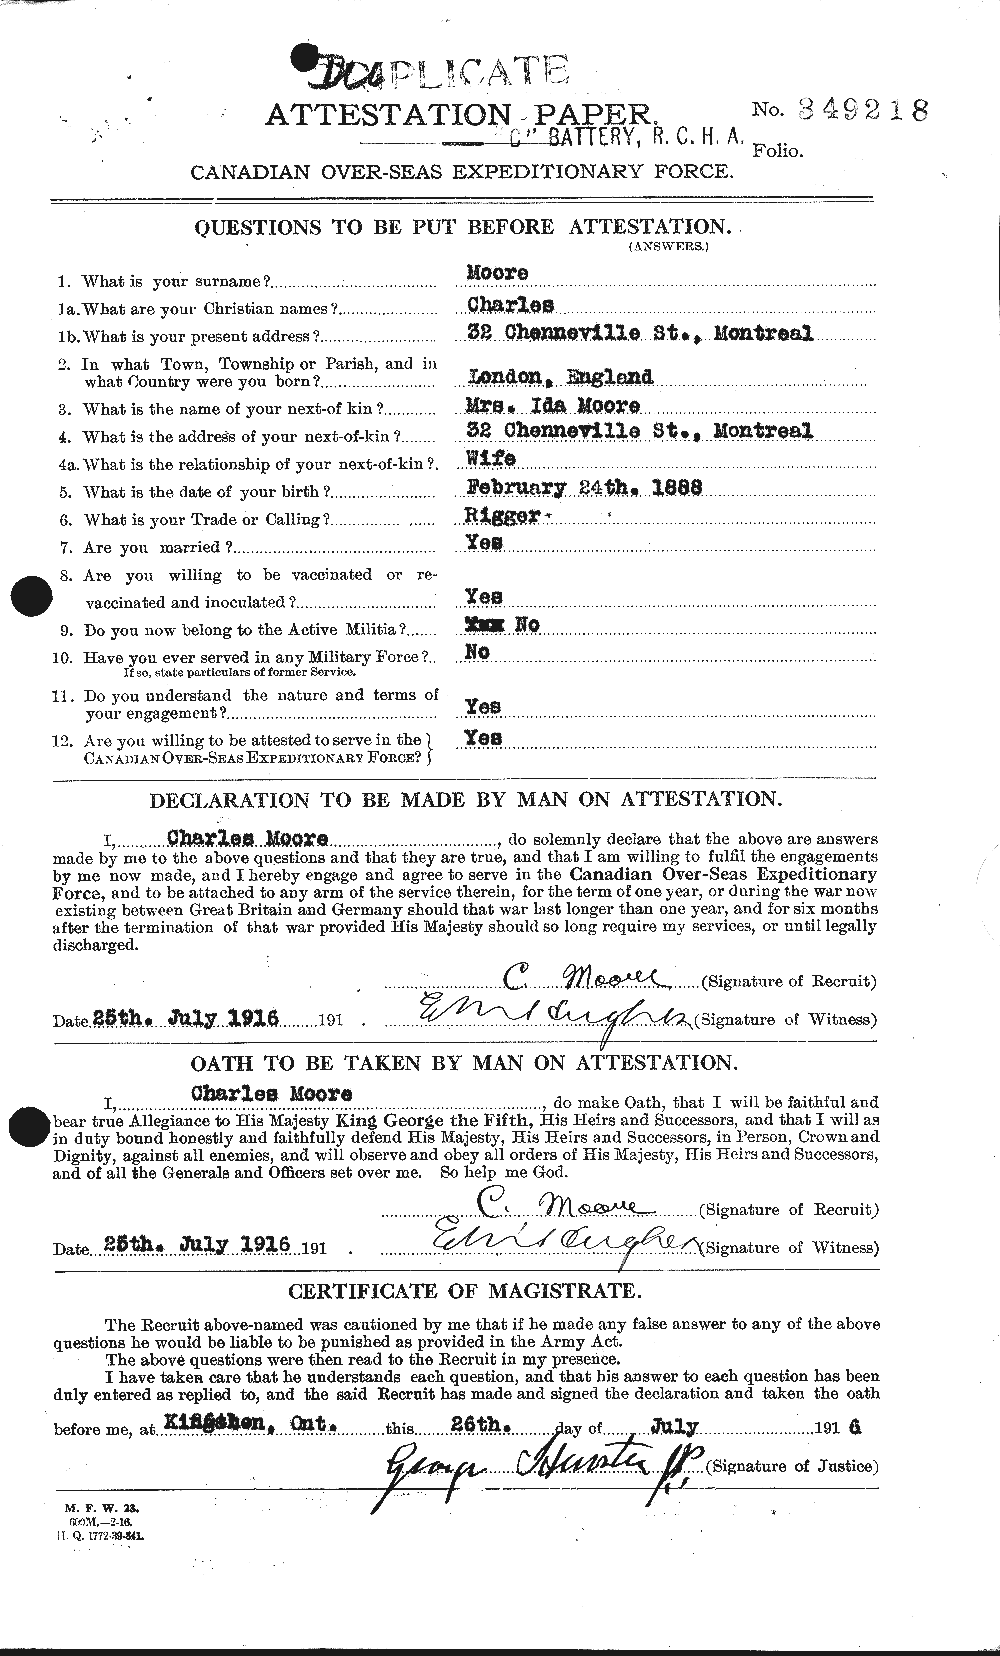 Personnel Records of the First World War - CEF 506483a